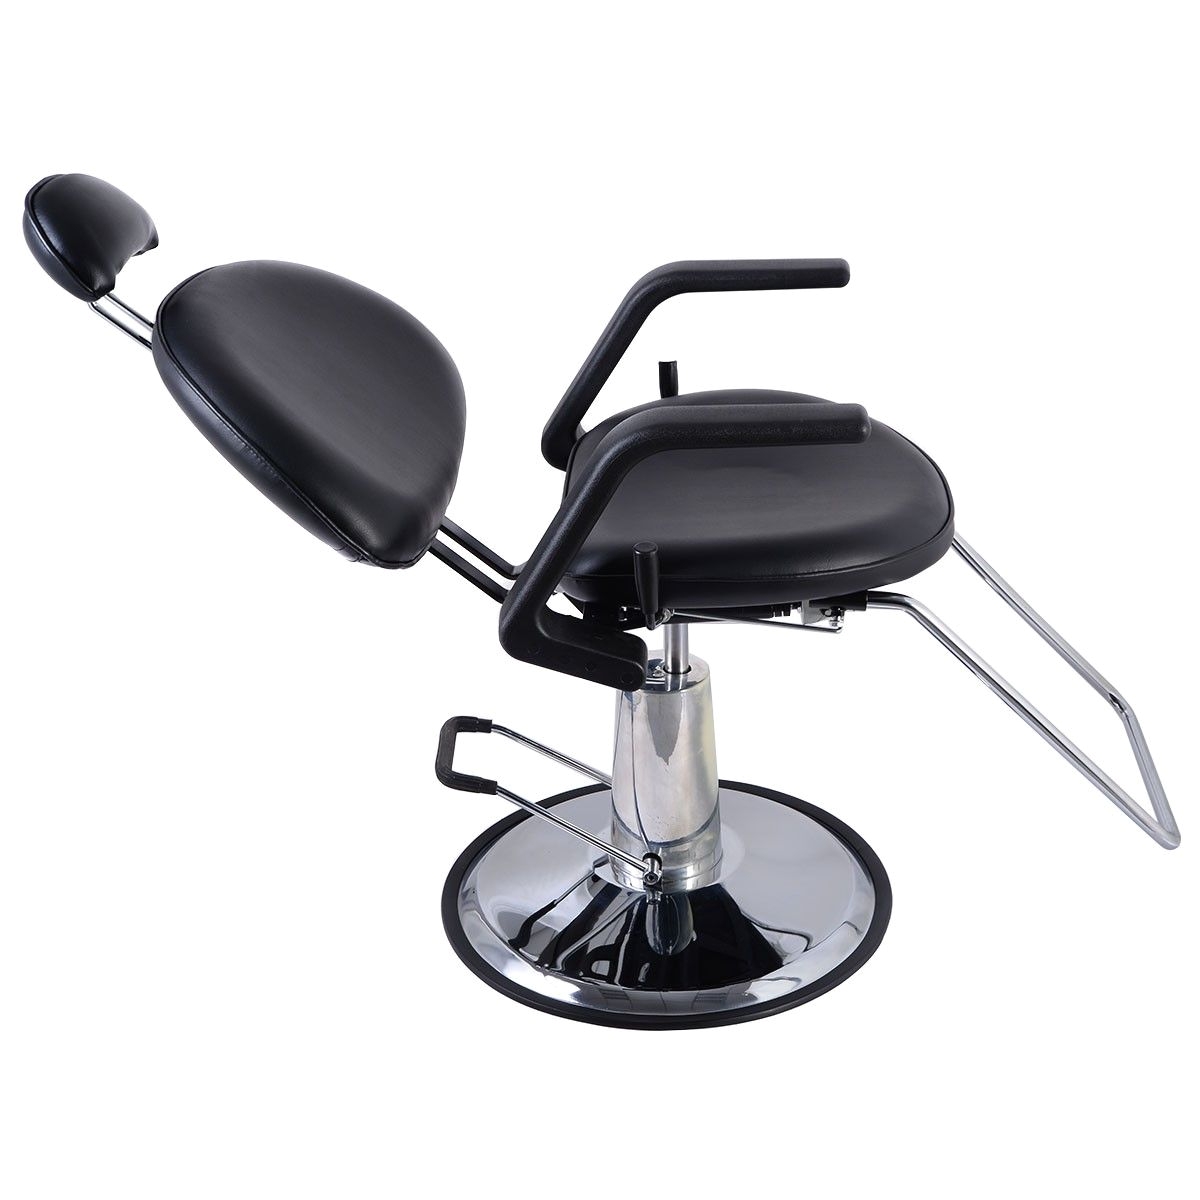 Used Barber Chairs for Sale In Jamaica Reclining Hydraulic Barber Chair Salon Beauty Spa Styling